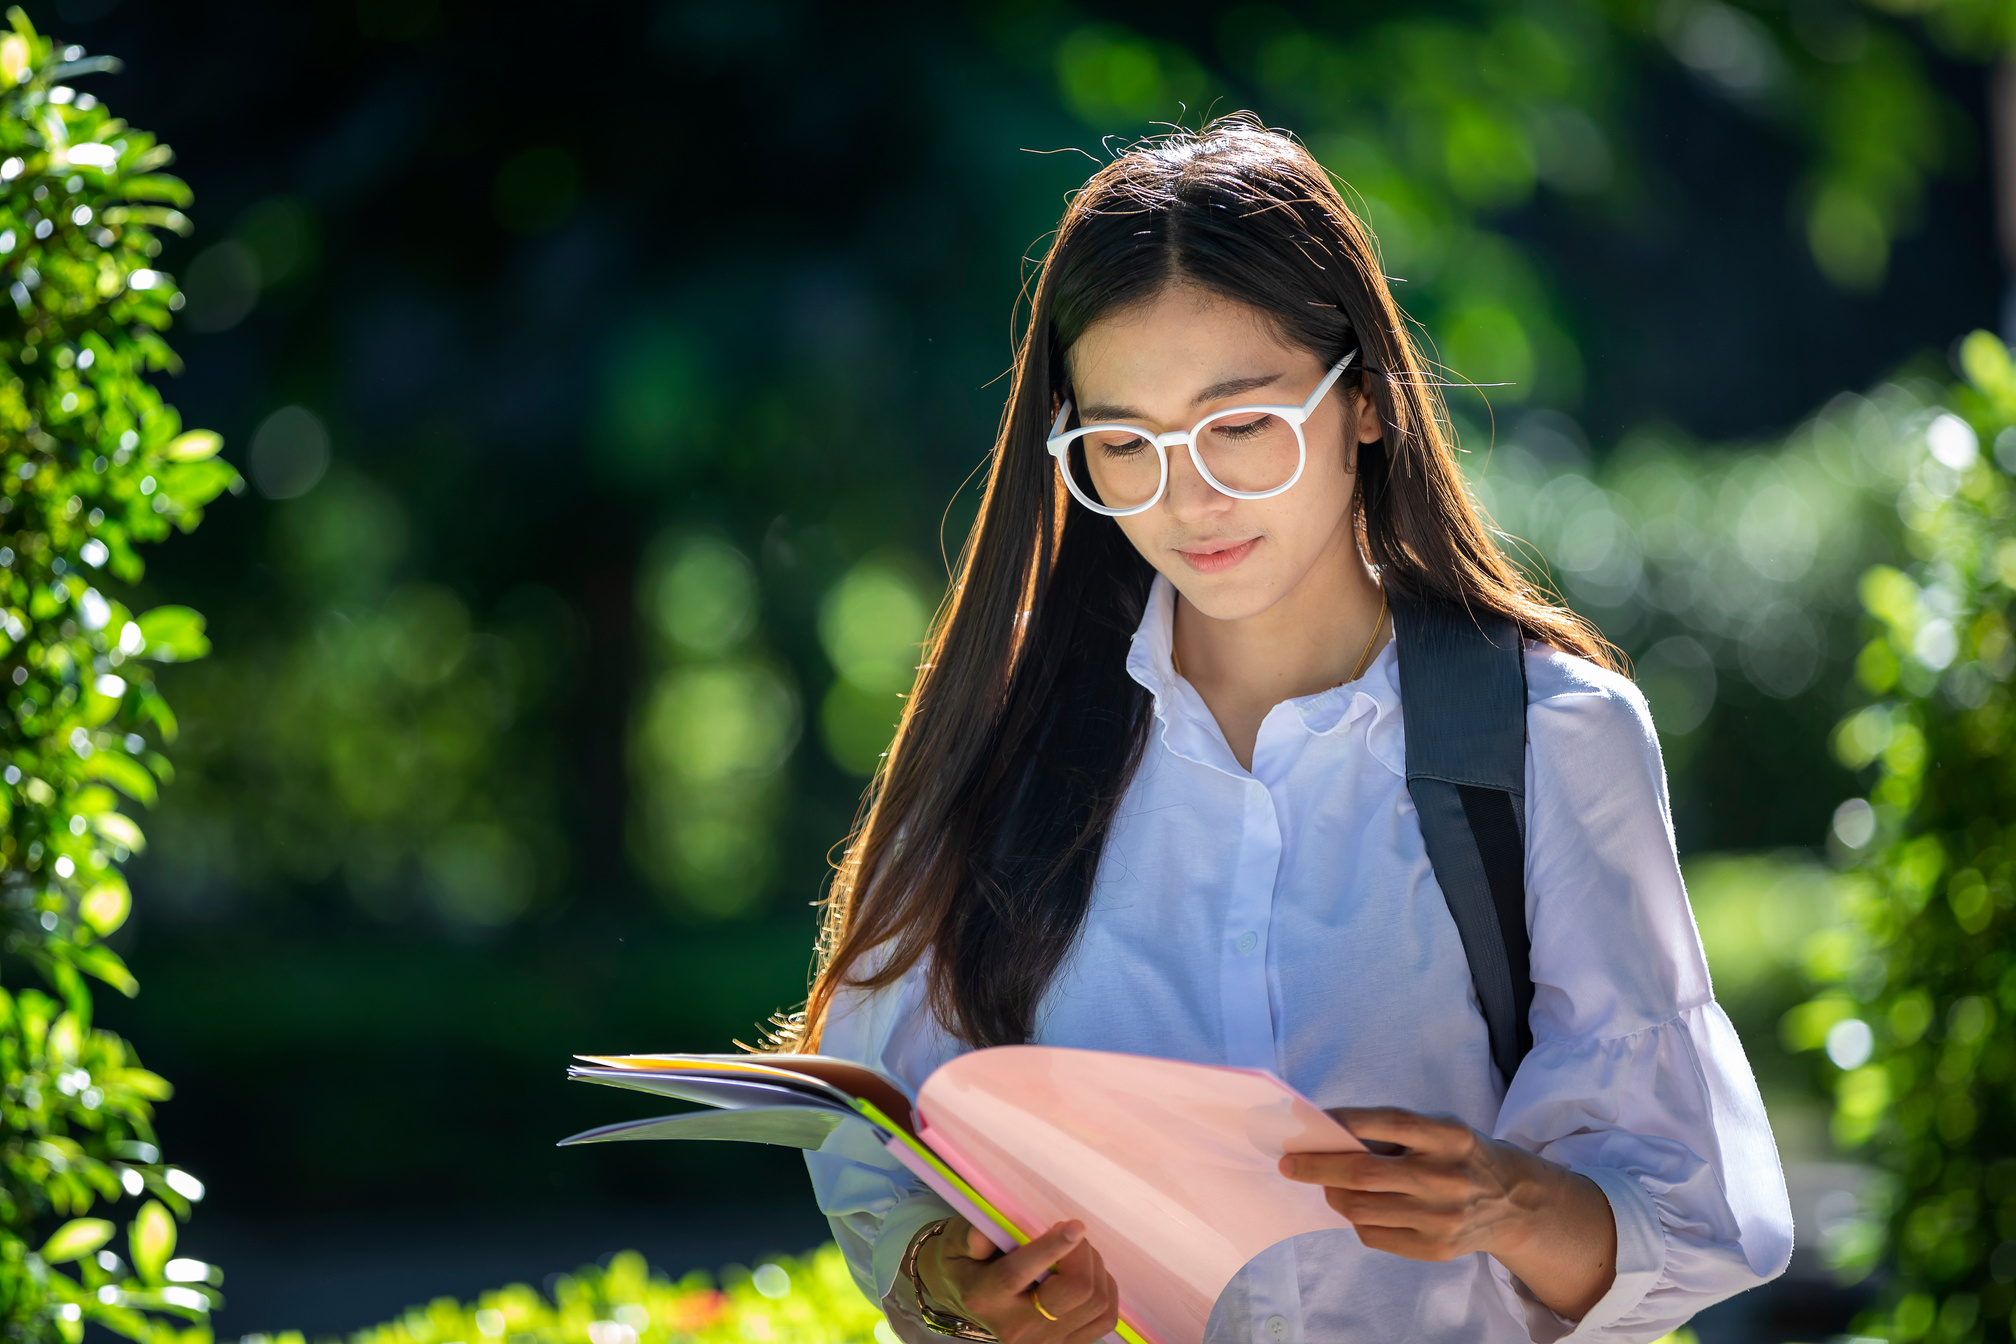 Female Student Wearing Glasses Outdoors